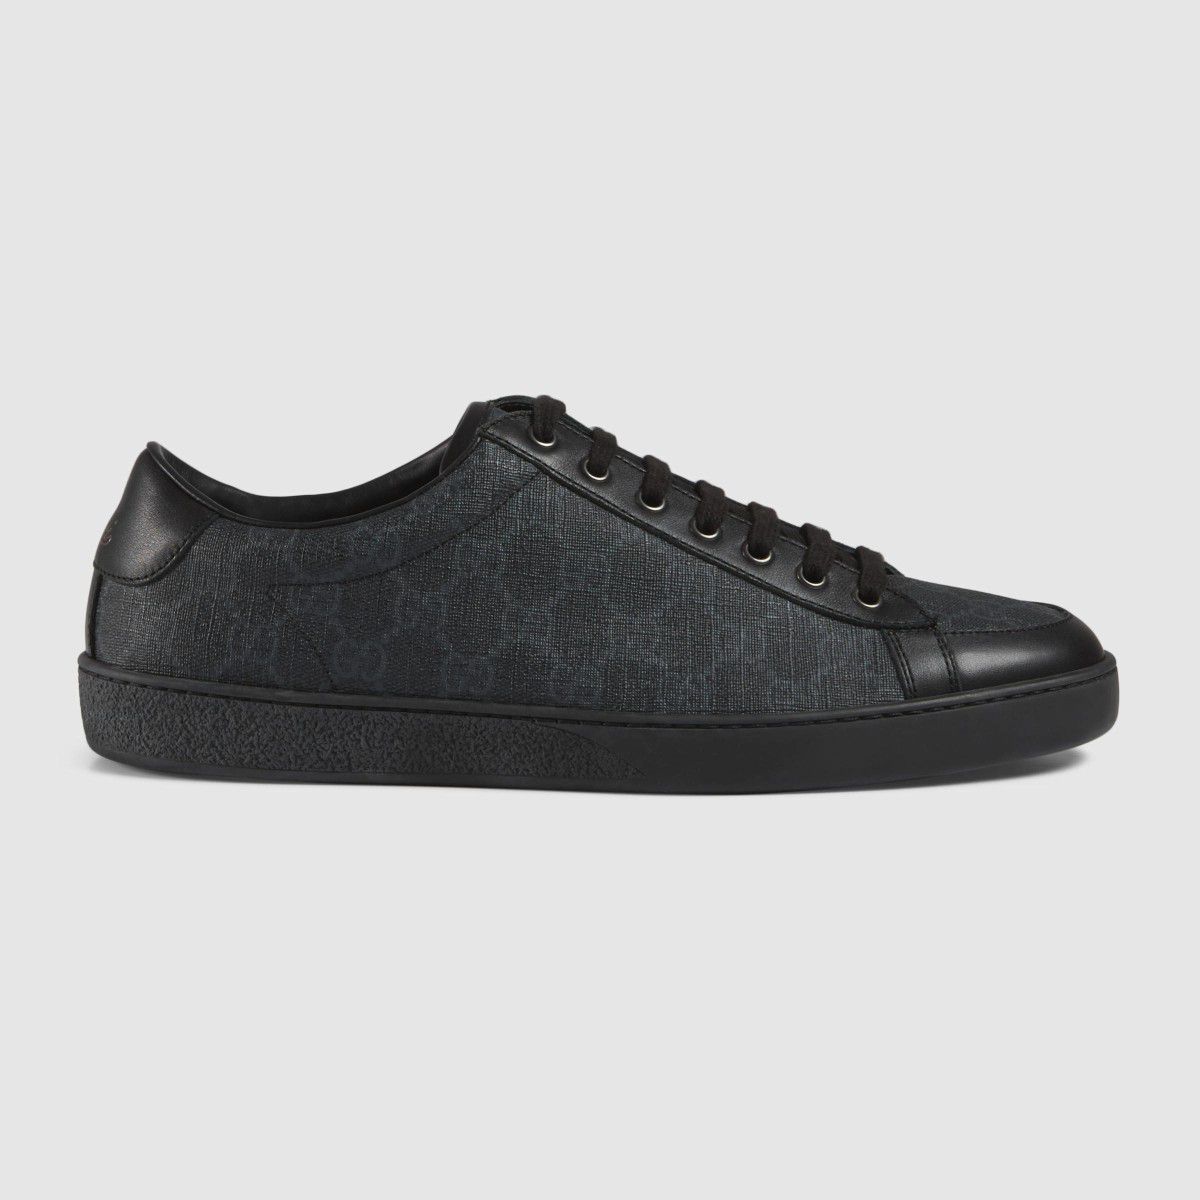 Men's Canvas and Leather Gucci Sneaker